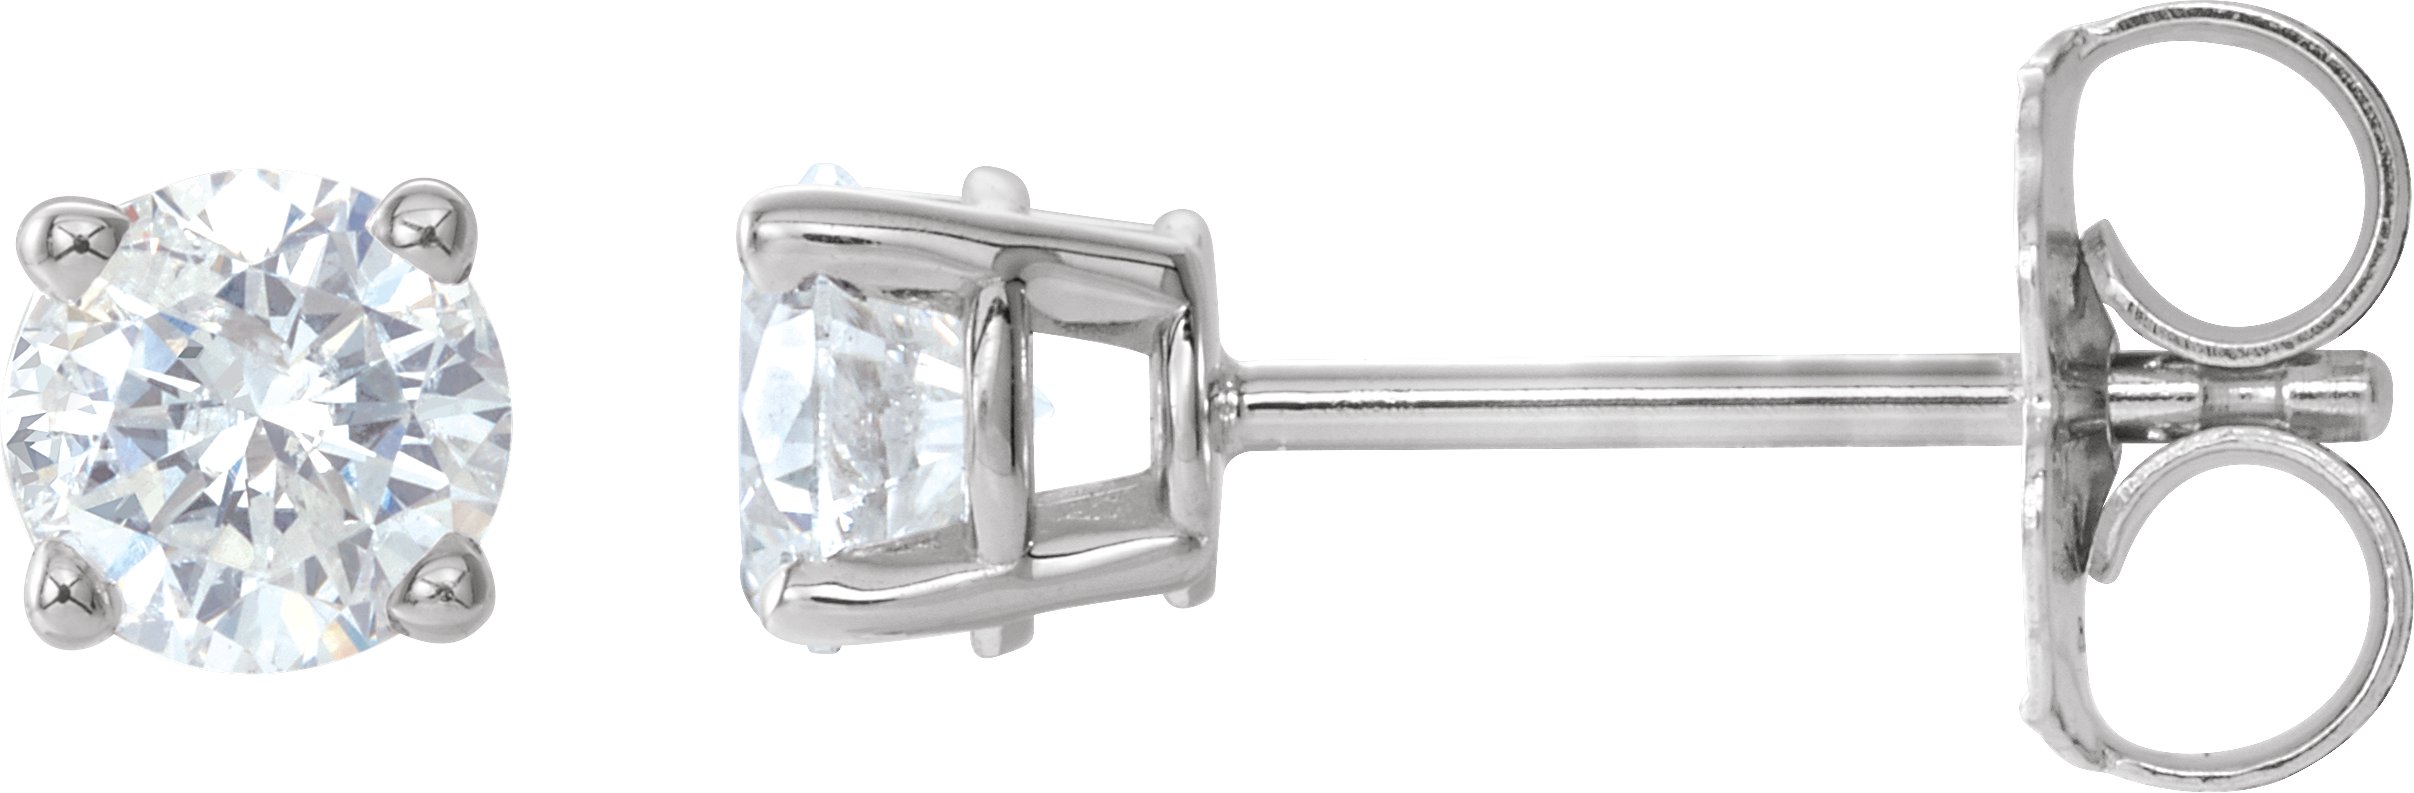 14K White 3/4 CTW Natural Diamond Stud Earrings with Friction Post